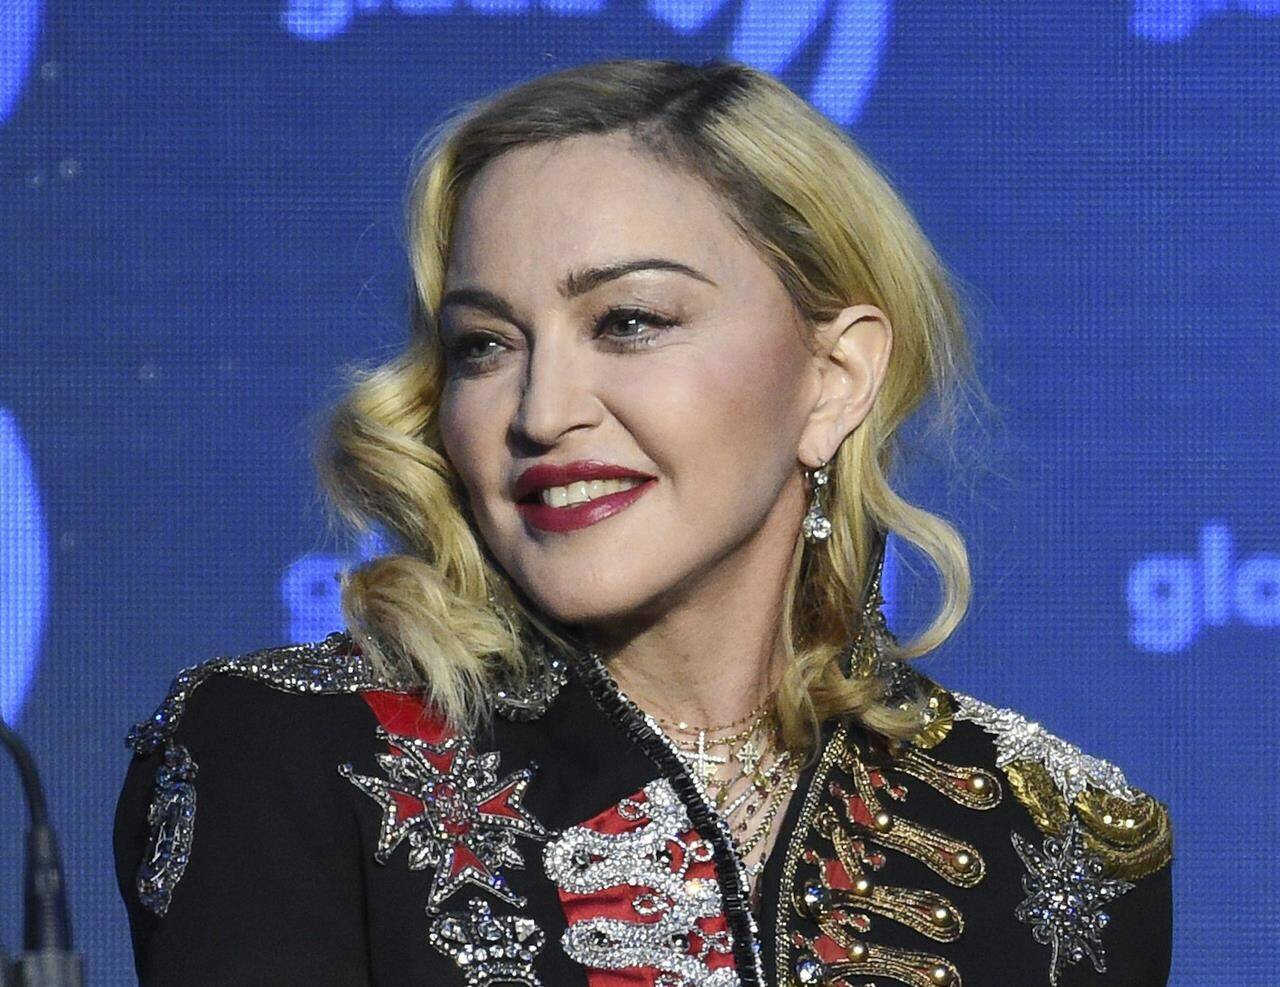 FILE - Madonna appears at the 30th annual GLAAD Media Awards in New York on May 4, 2019, in New York. Madonna kicked off her career-spanning Celebration Tour at London’s O2 Arena on Saturday night, Oct. 14, 2023, marking her first performance since suffering what her manager called a “serious bacterial infection” that led to hospitalization in an intensive care unit for several days back in June. (Photo by Evan Agostini/Invision/AP, File)